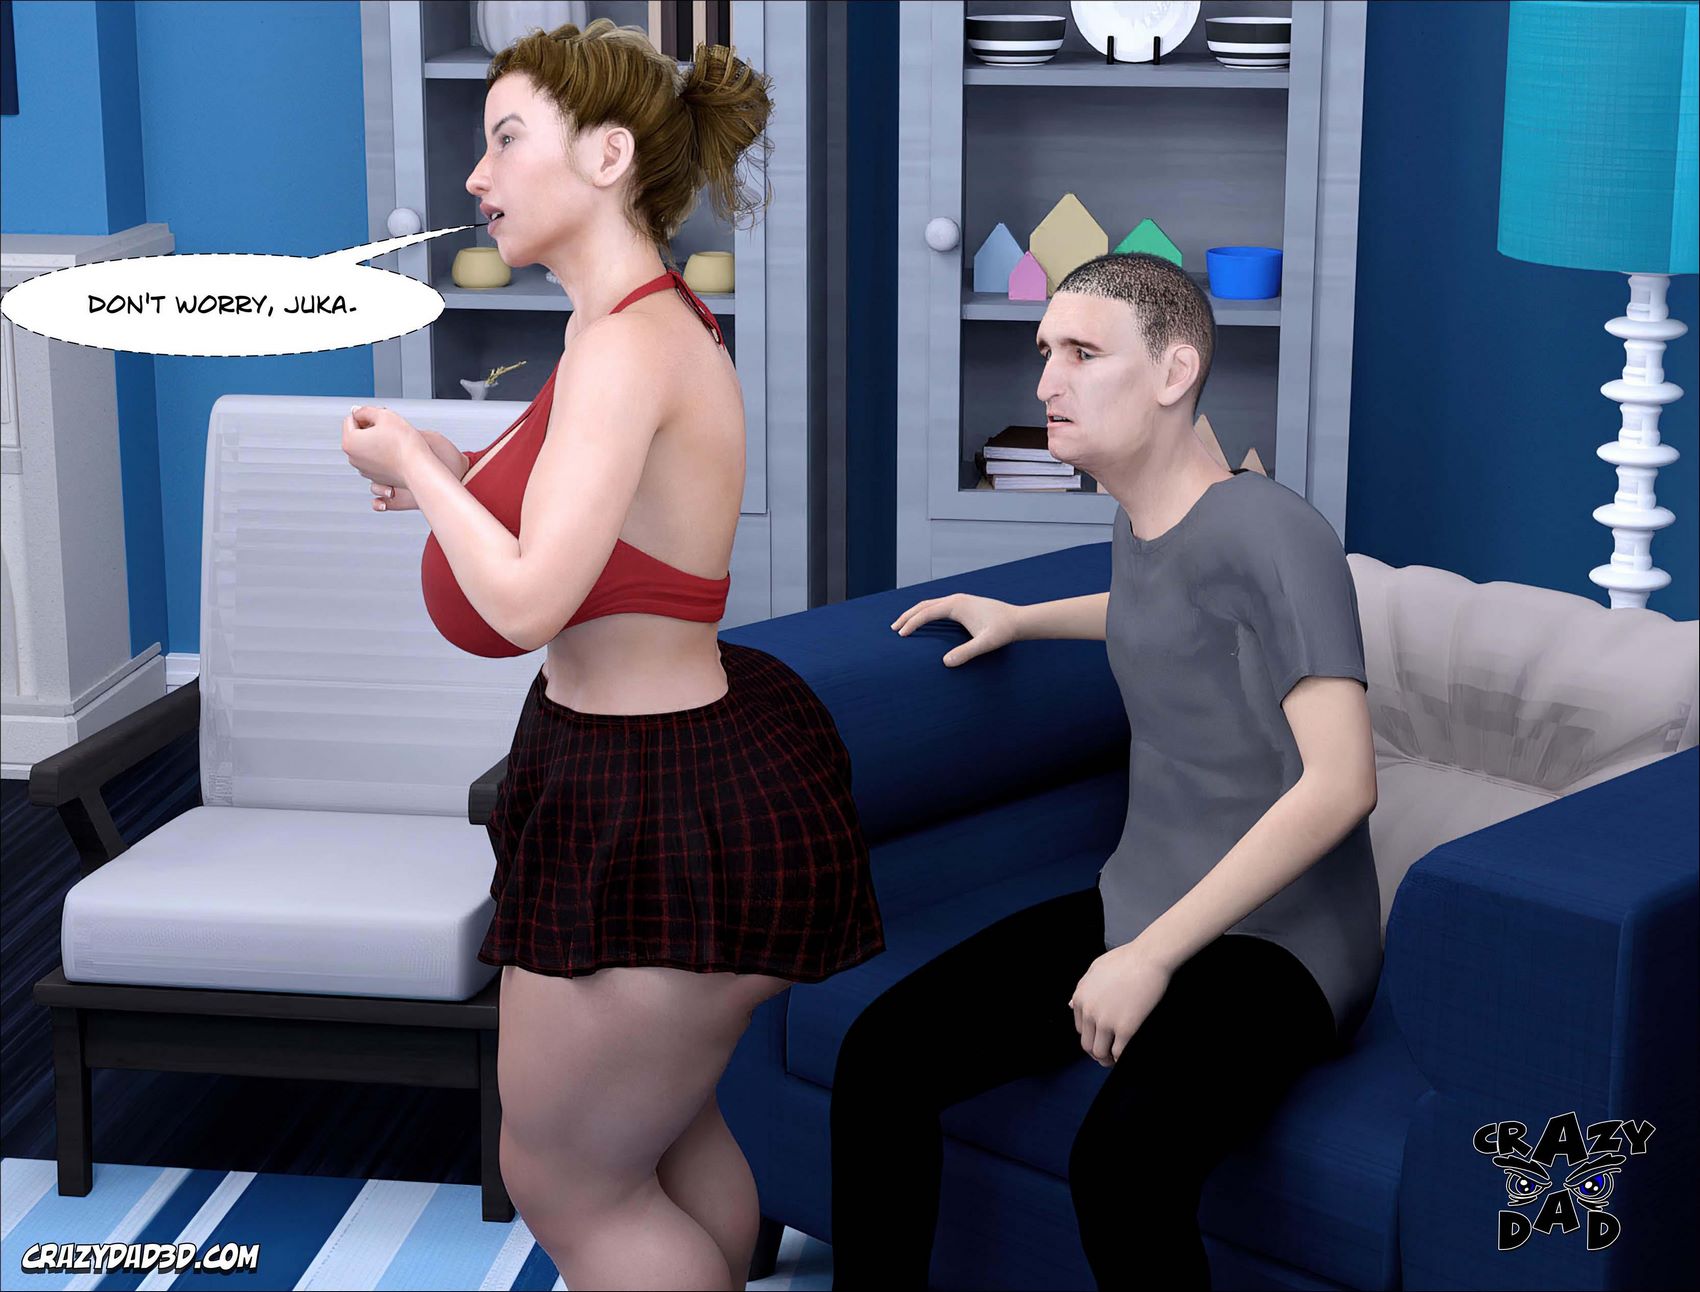 Father-in-Law at Home Part 33 – CrazyDad3D